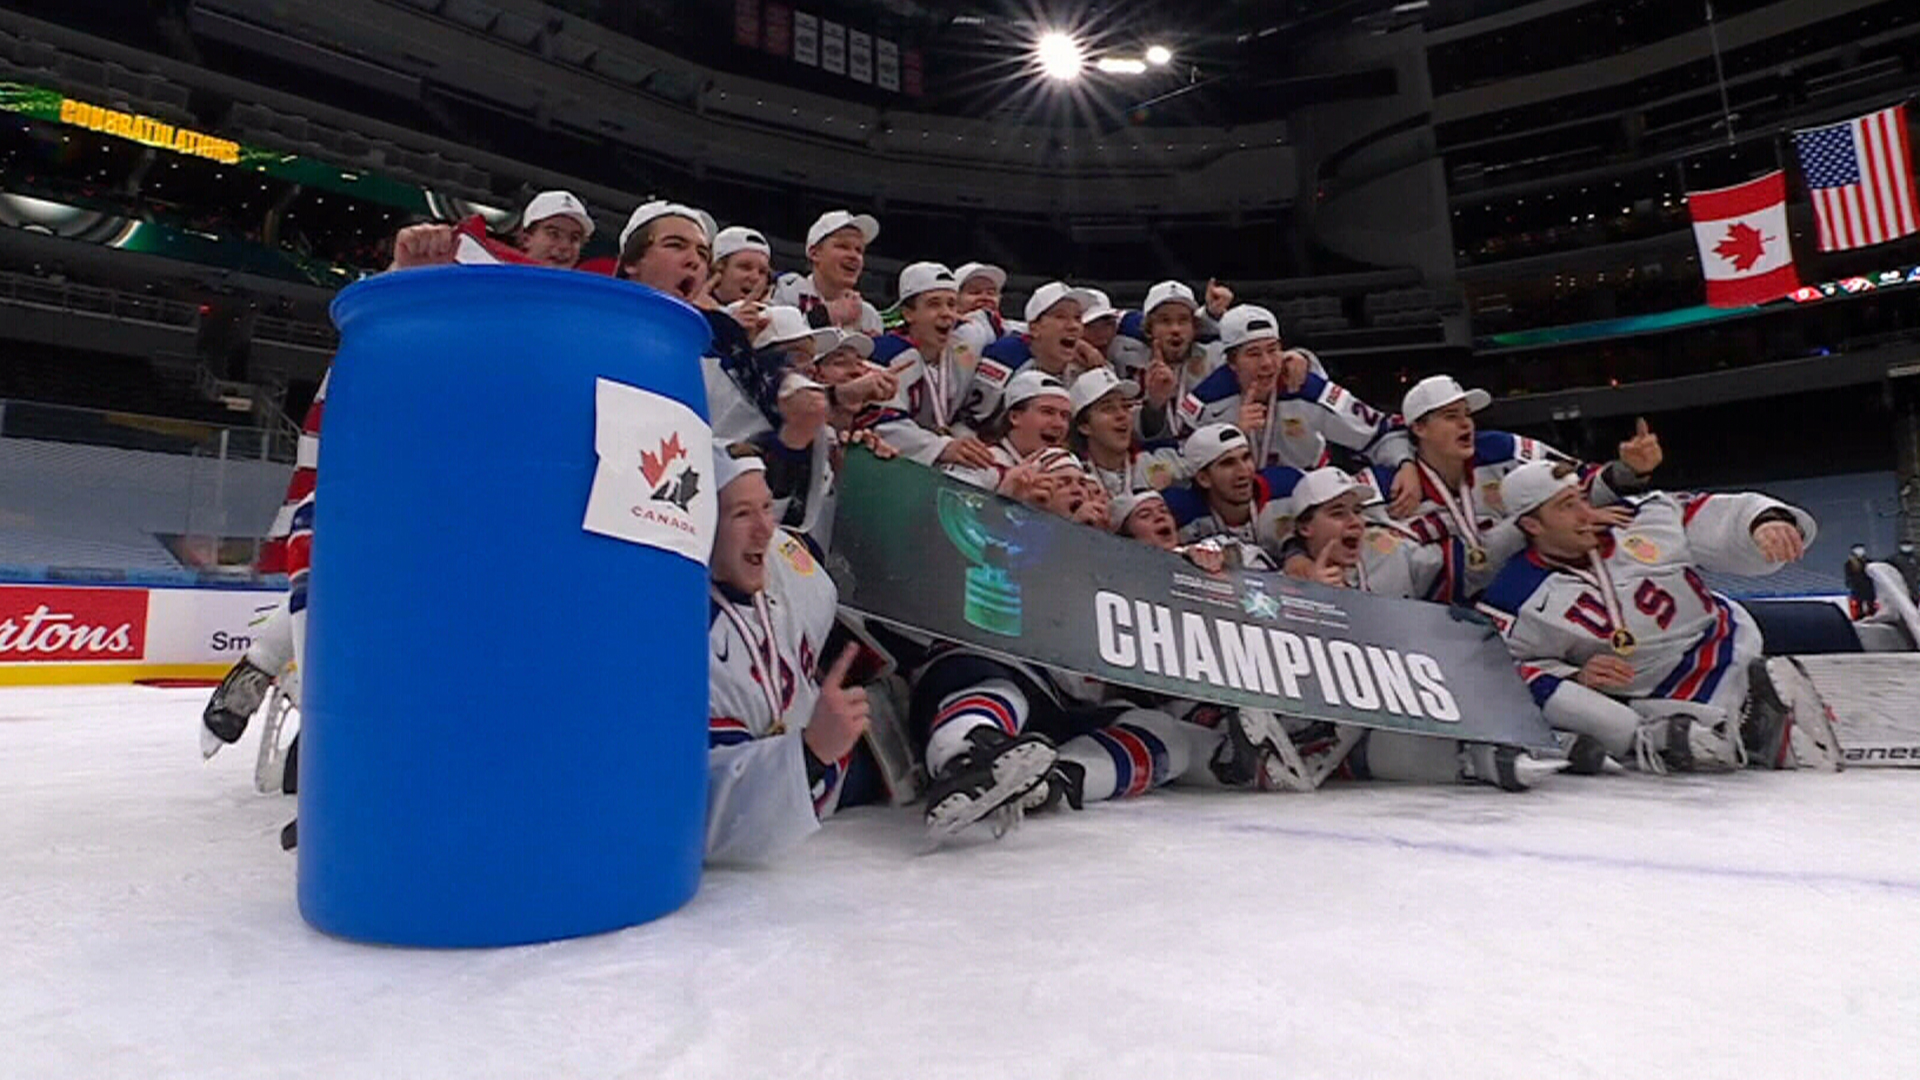 Team USA coach says team wasn't trying to disrespect Canada with barrel  celebration - Video - TSN